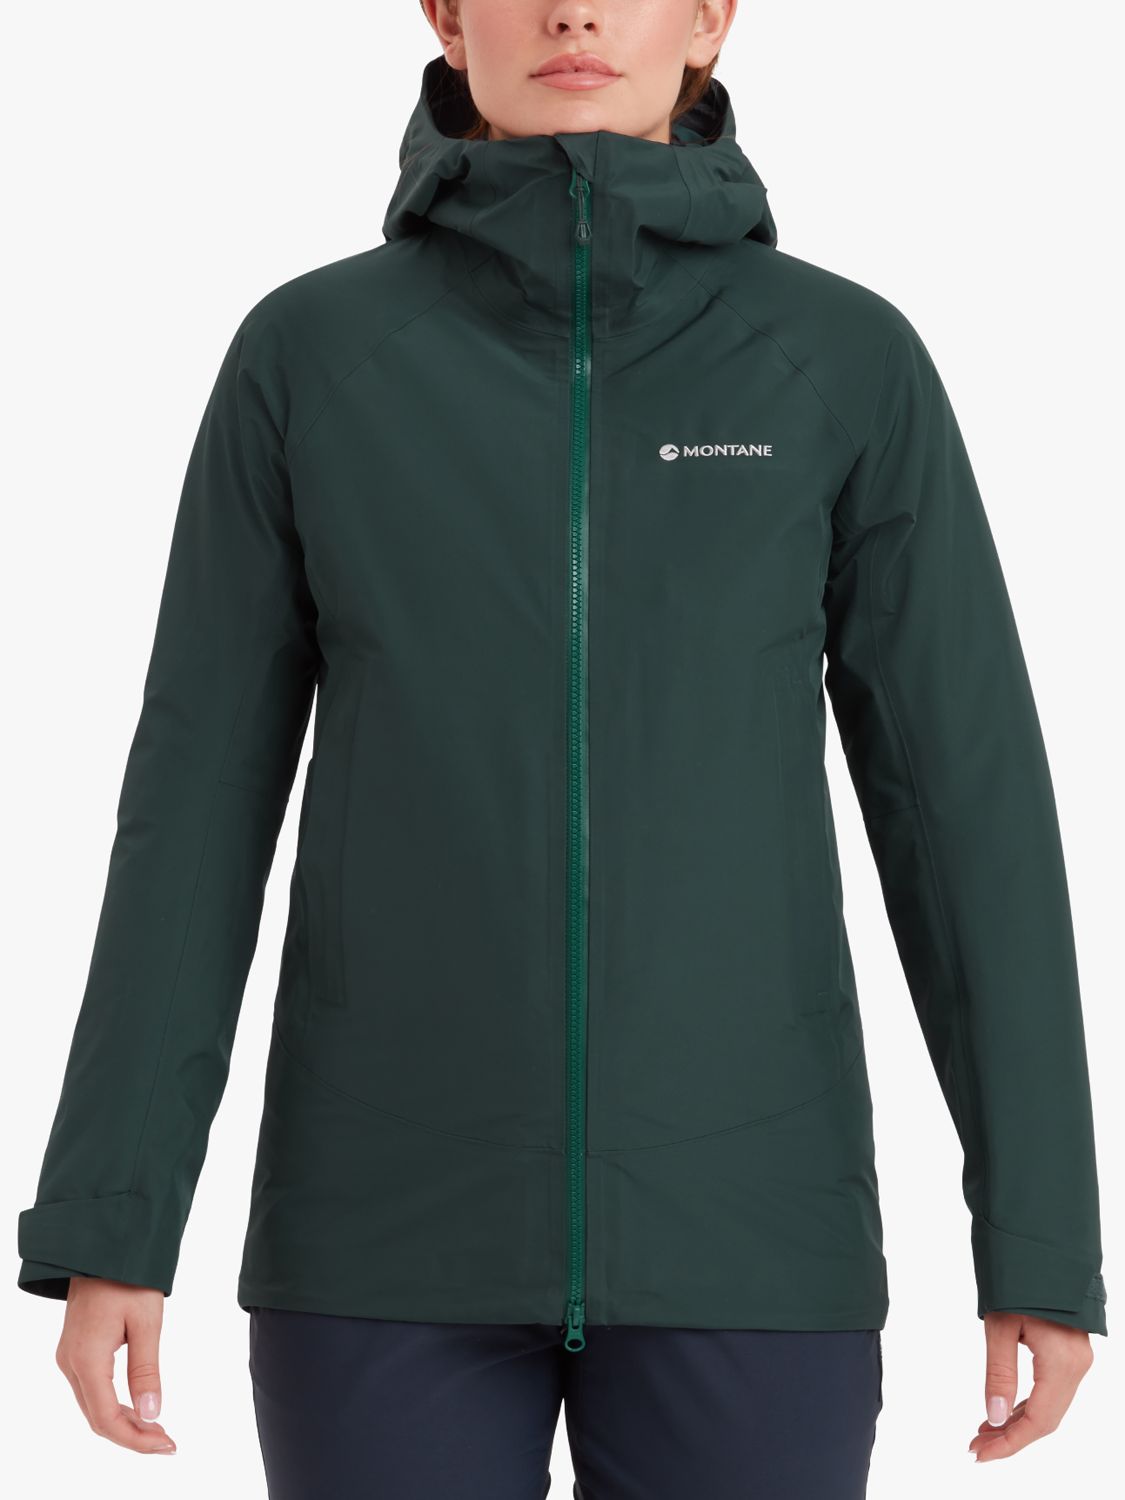 Montane Phase Women's Gore-Tex Waterproof Jacket, Deep Forest at